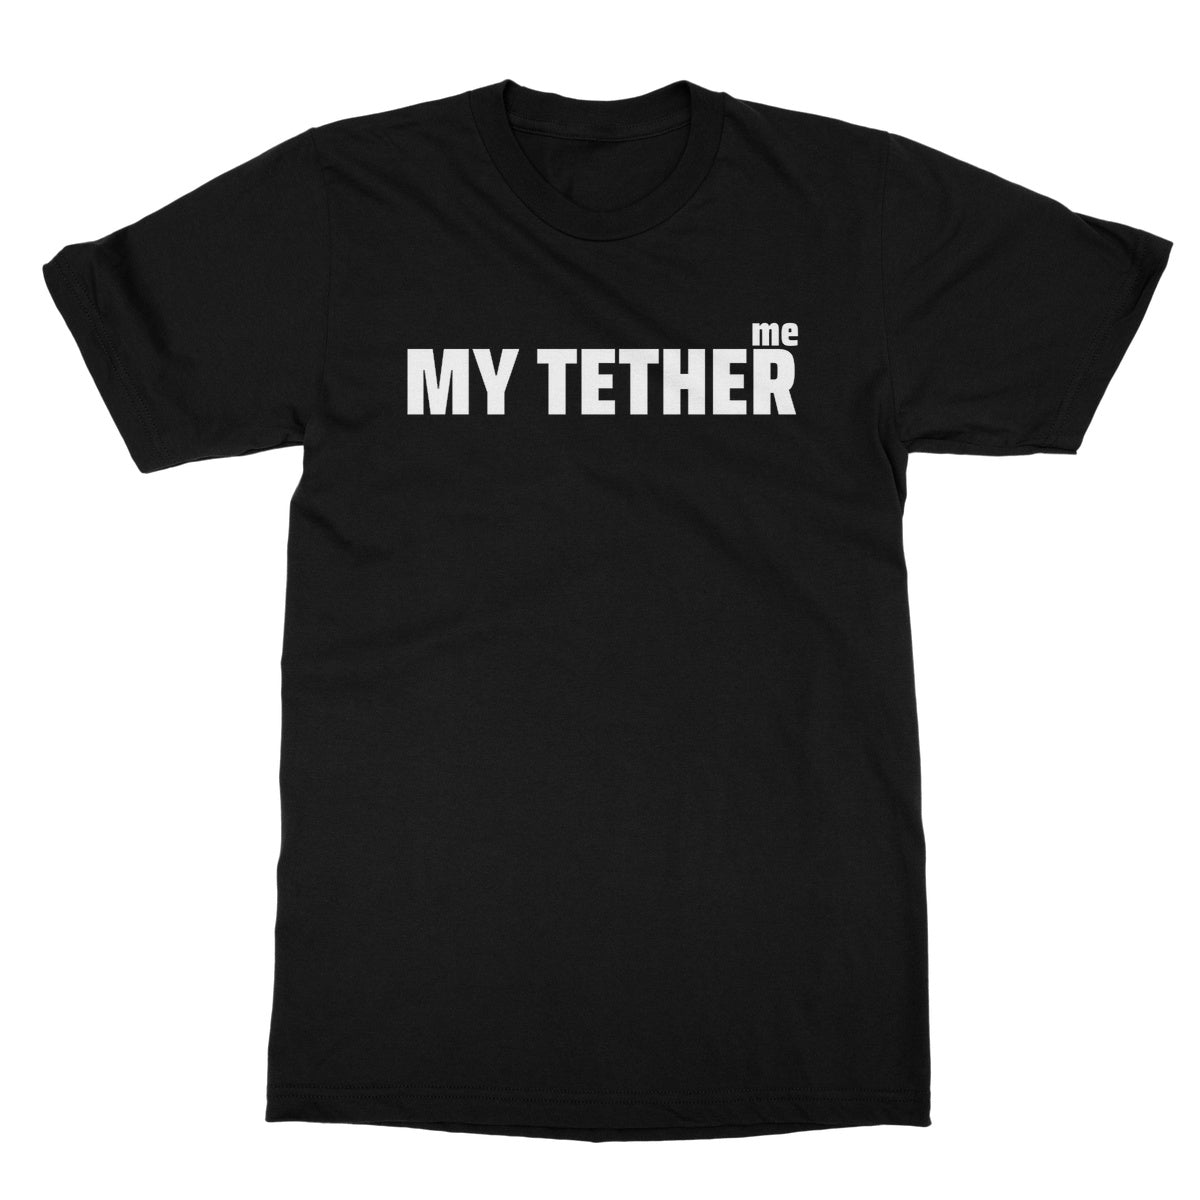 end of my tether t shirt black